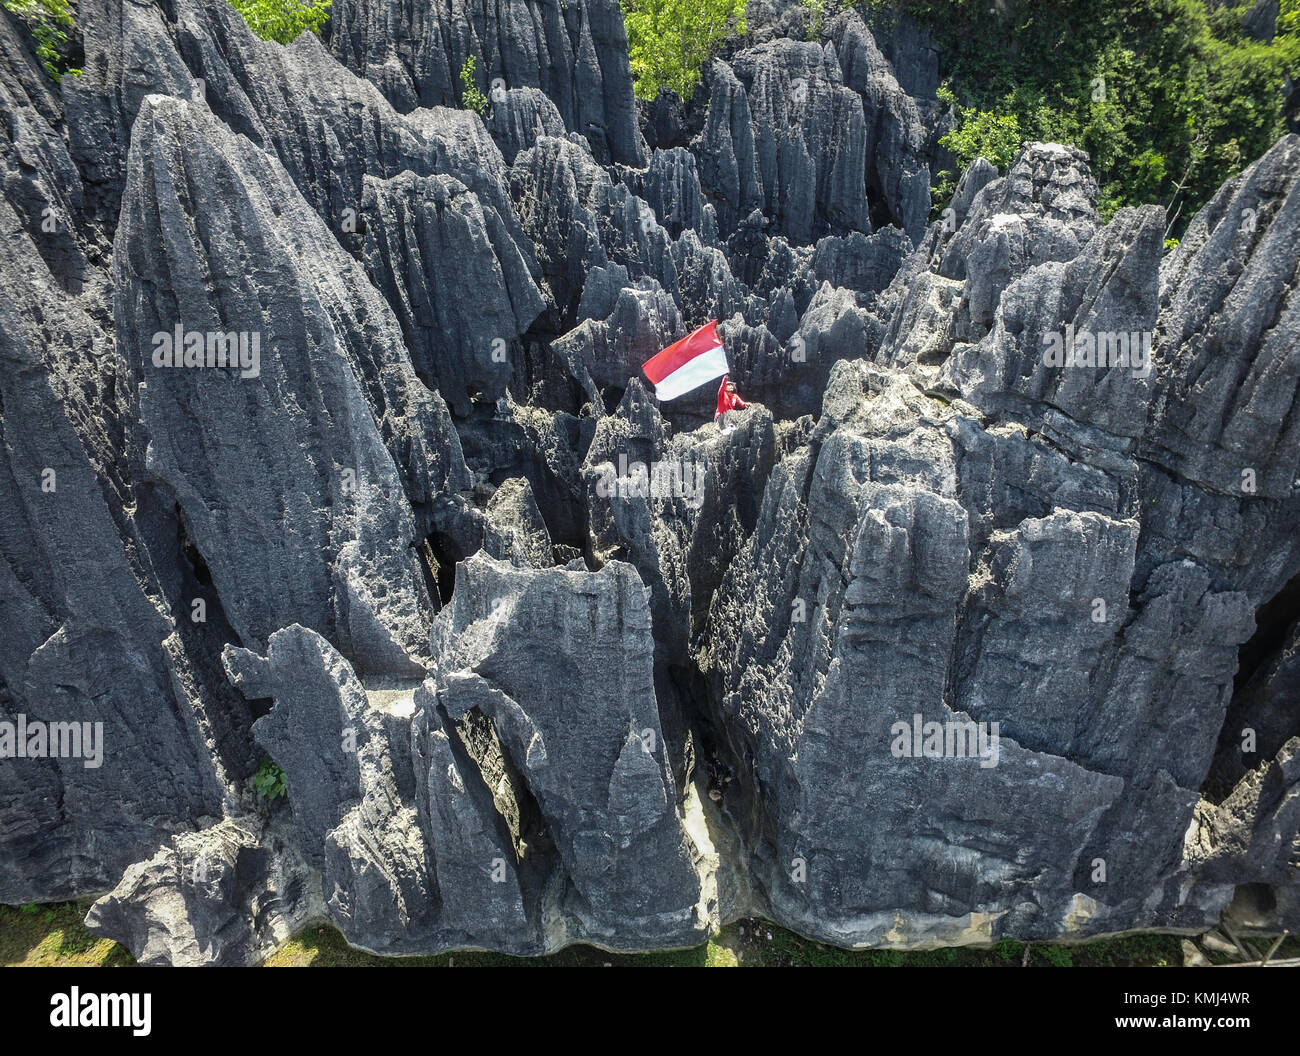 The forest of rock in Rammang-Rammang near Maros Makassar in South Sulawesi - Indonesia. Stock Photo